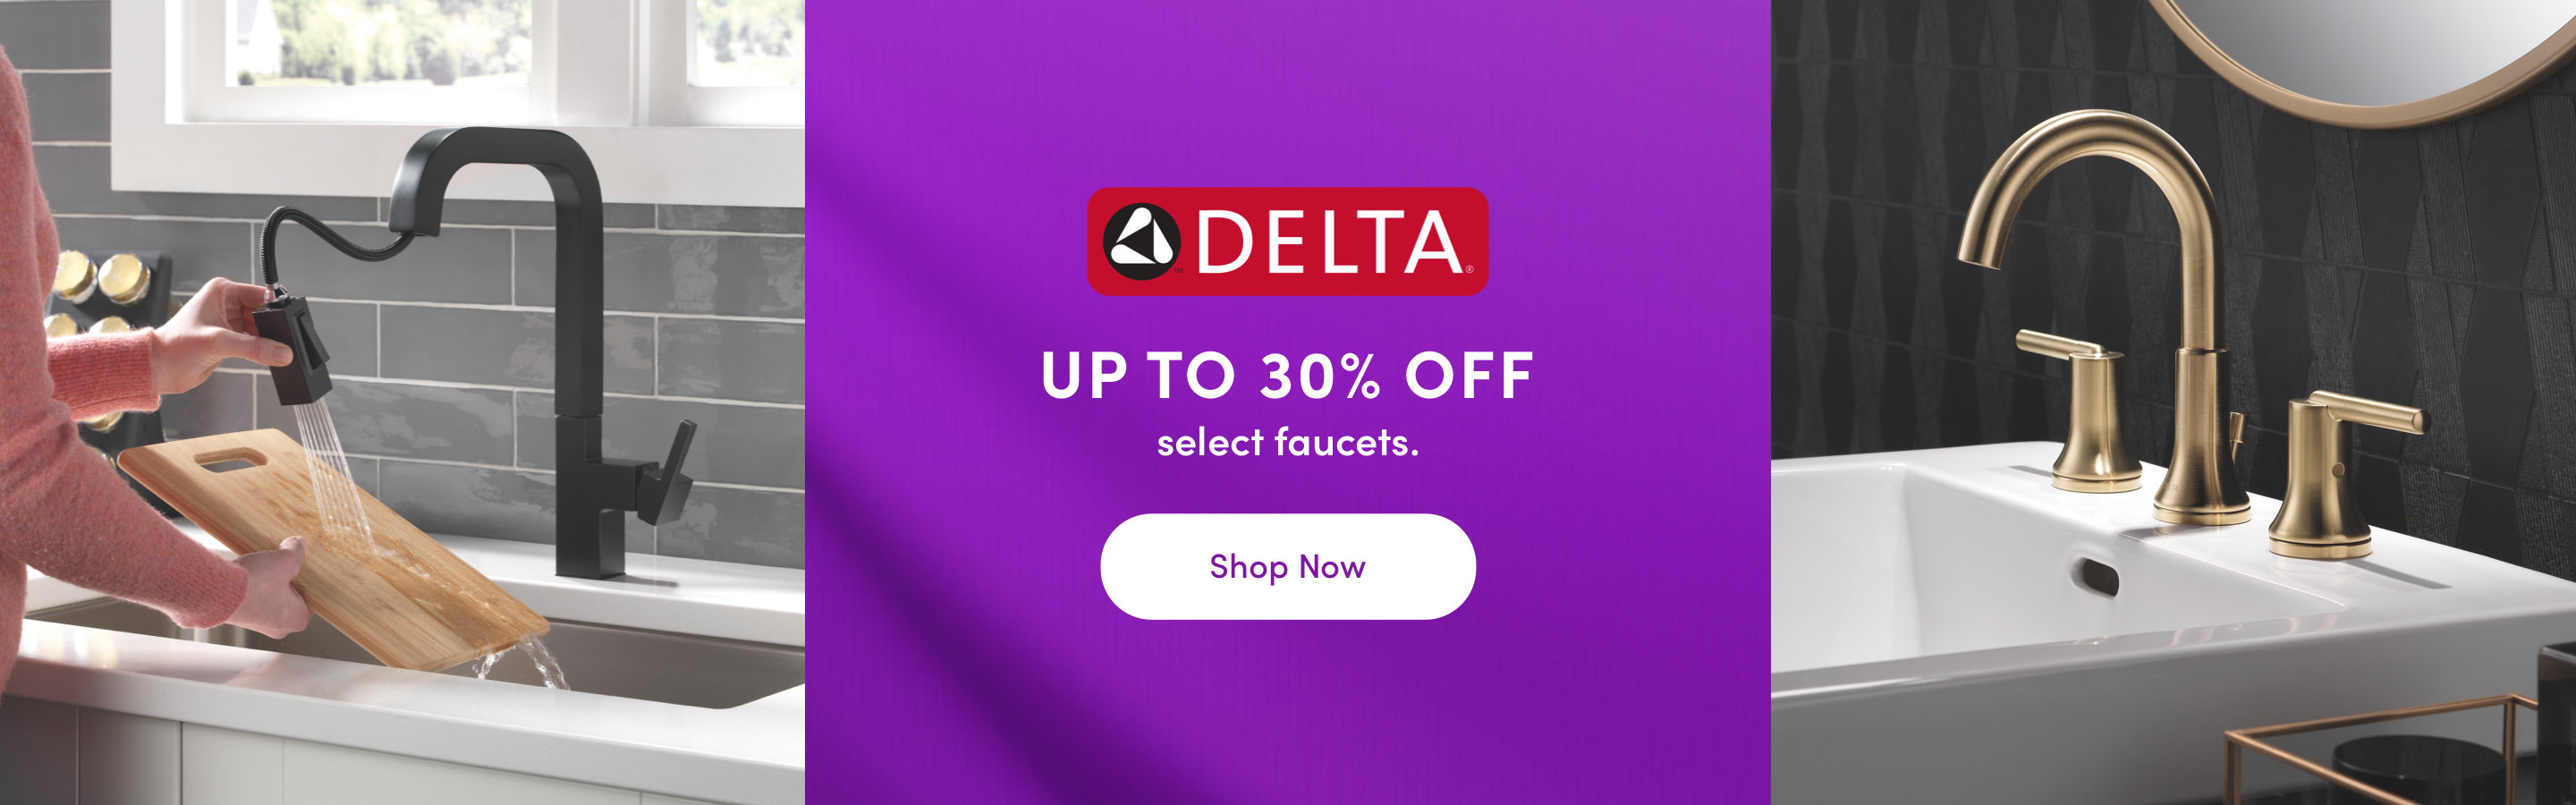 Delta Up to 30% OFF select faucets Shop Now